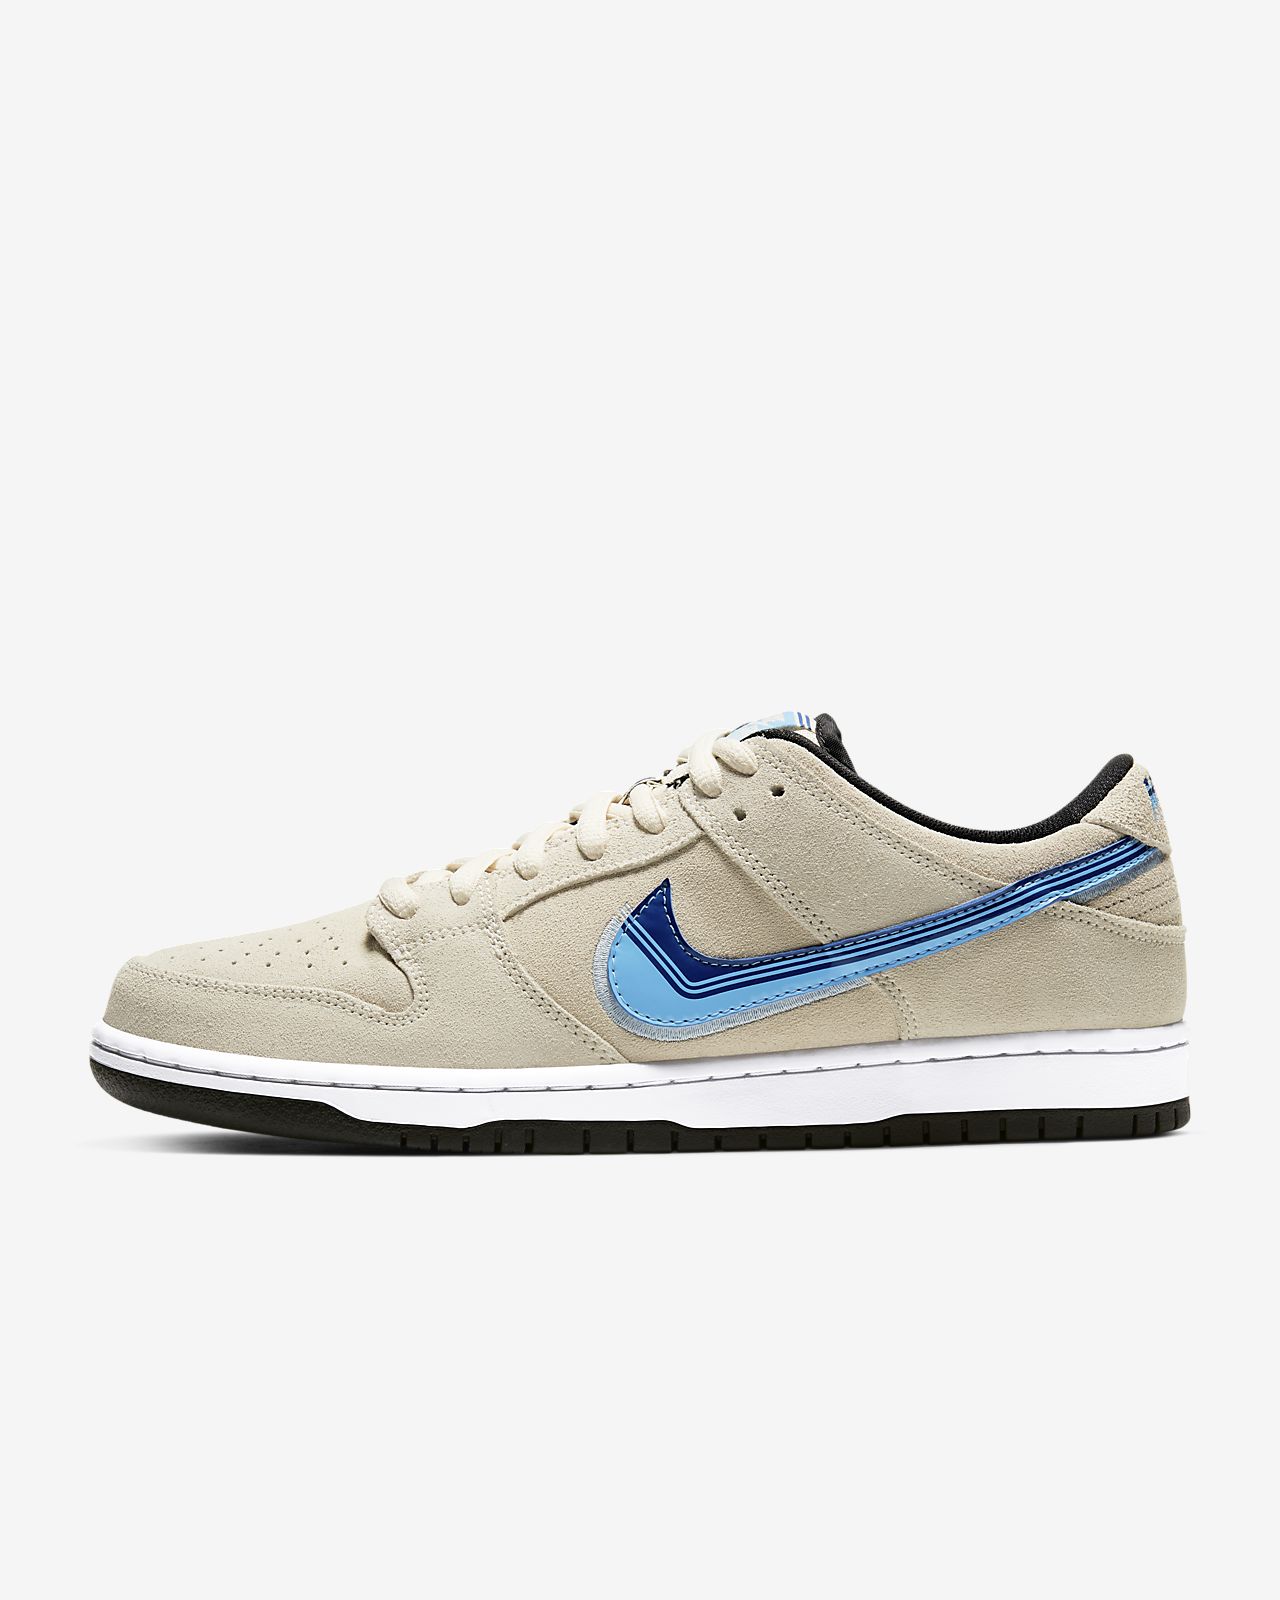 Nike Official Nike Sb Dunk Low Pro Skate Shoe Online Store Mail